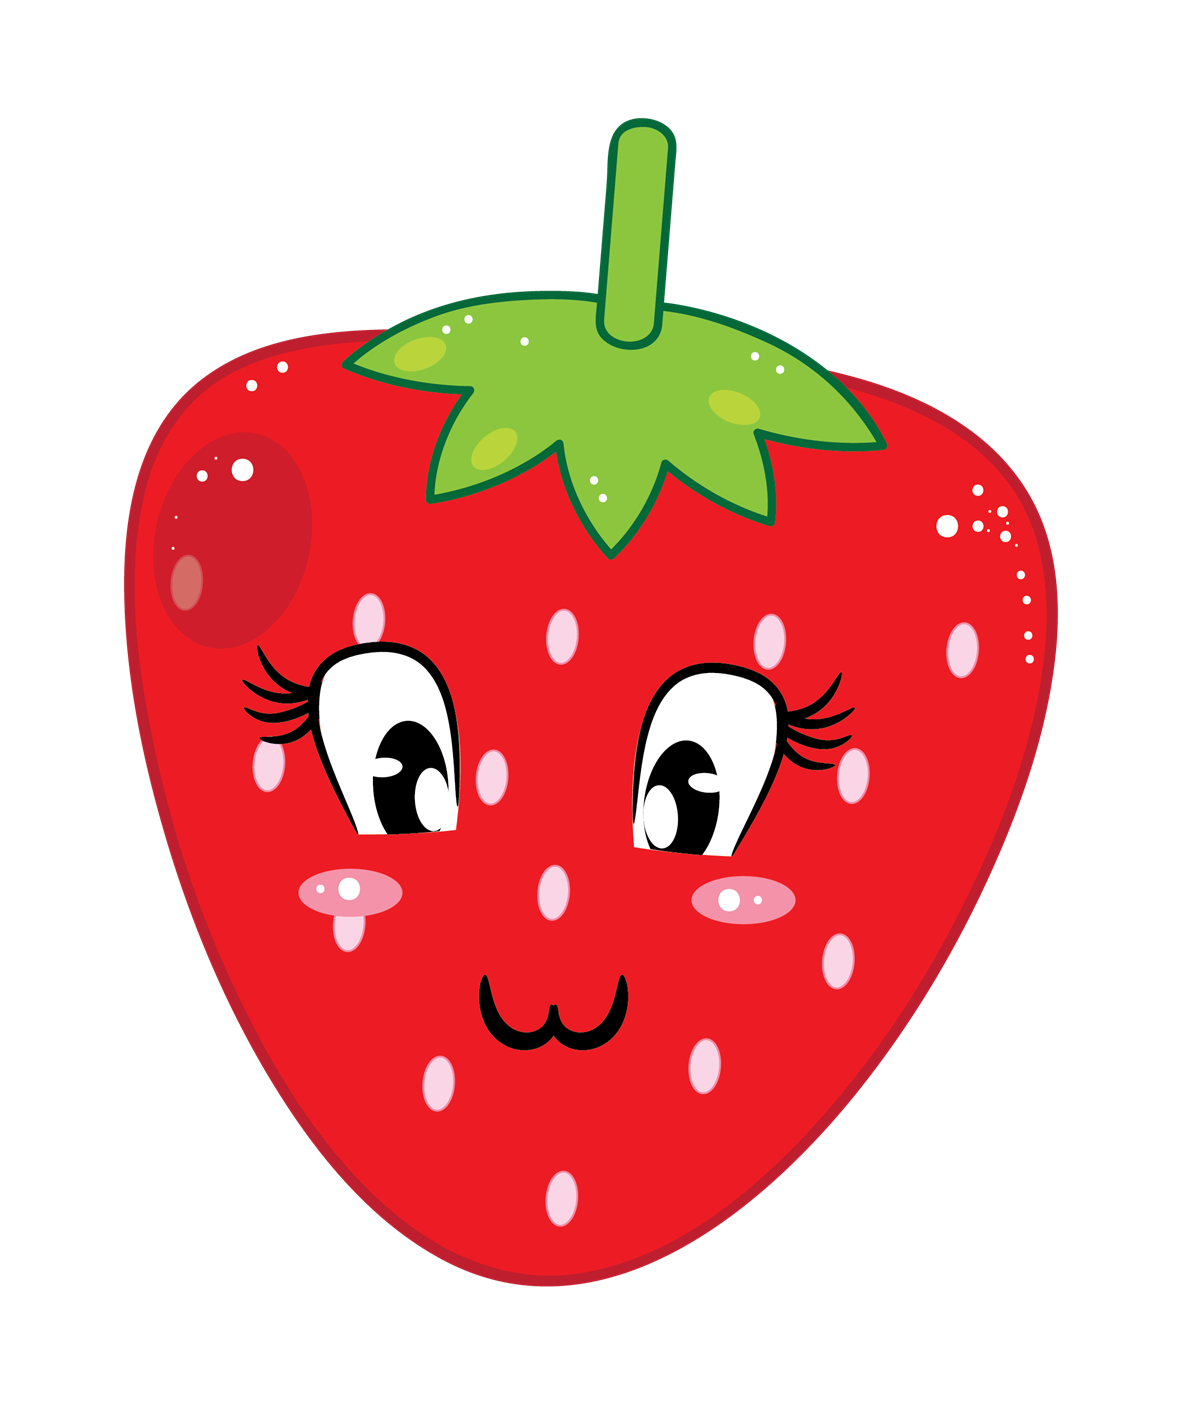 This cute cartoon strawberry clip art done in cool kawaii style is free for personal or commercial use. Add life to your projects by using this clip art.